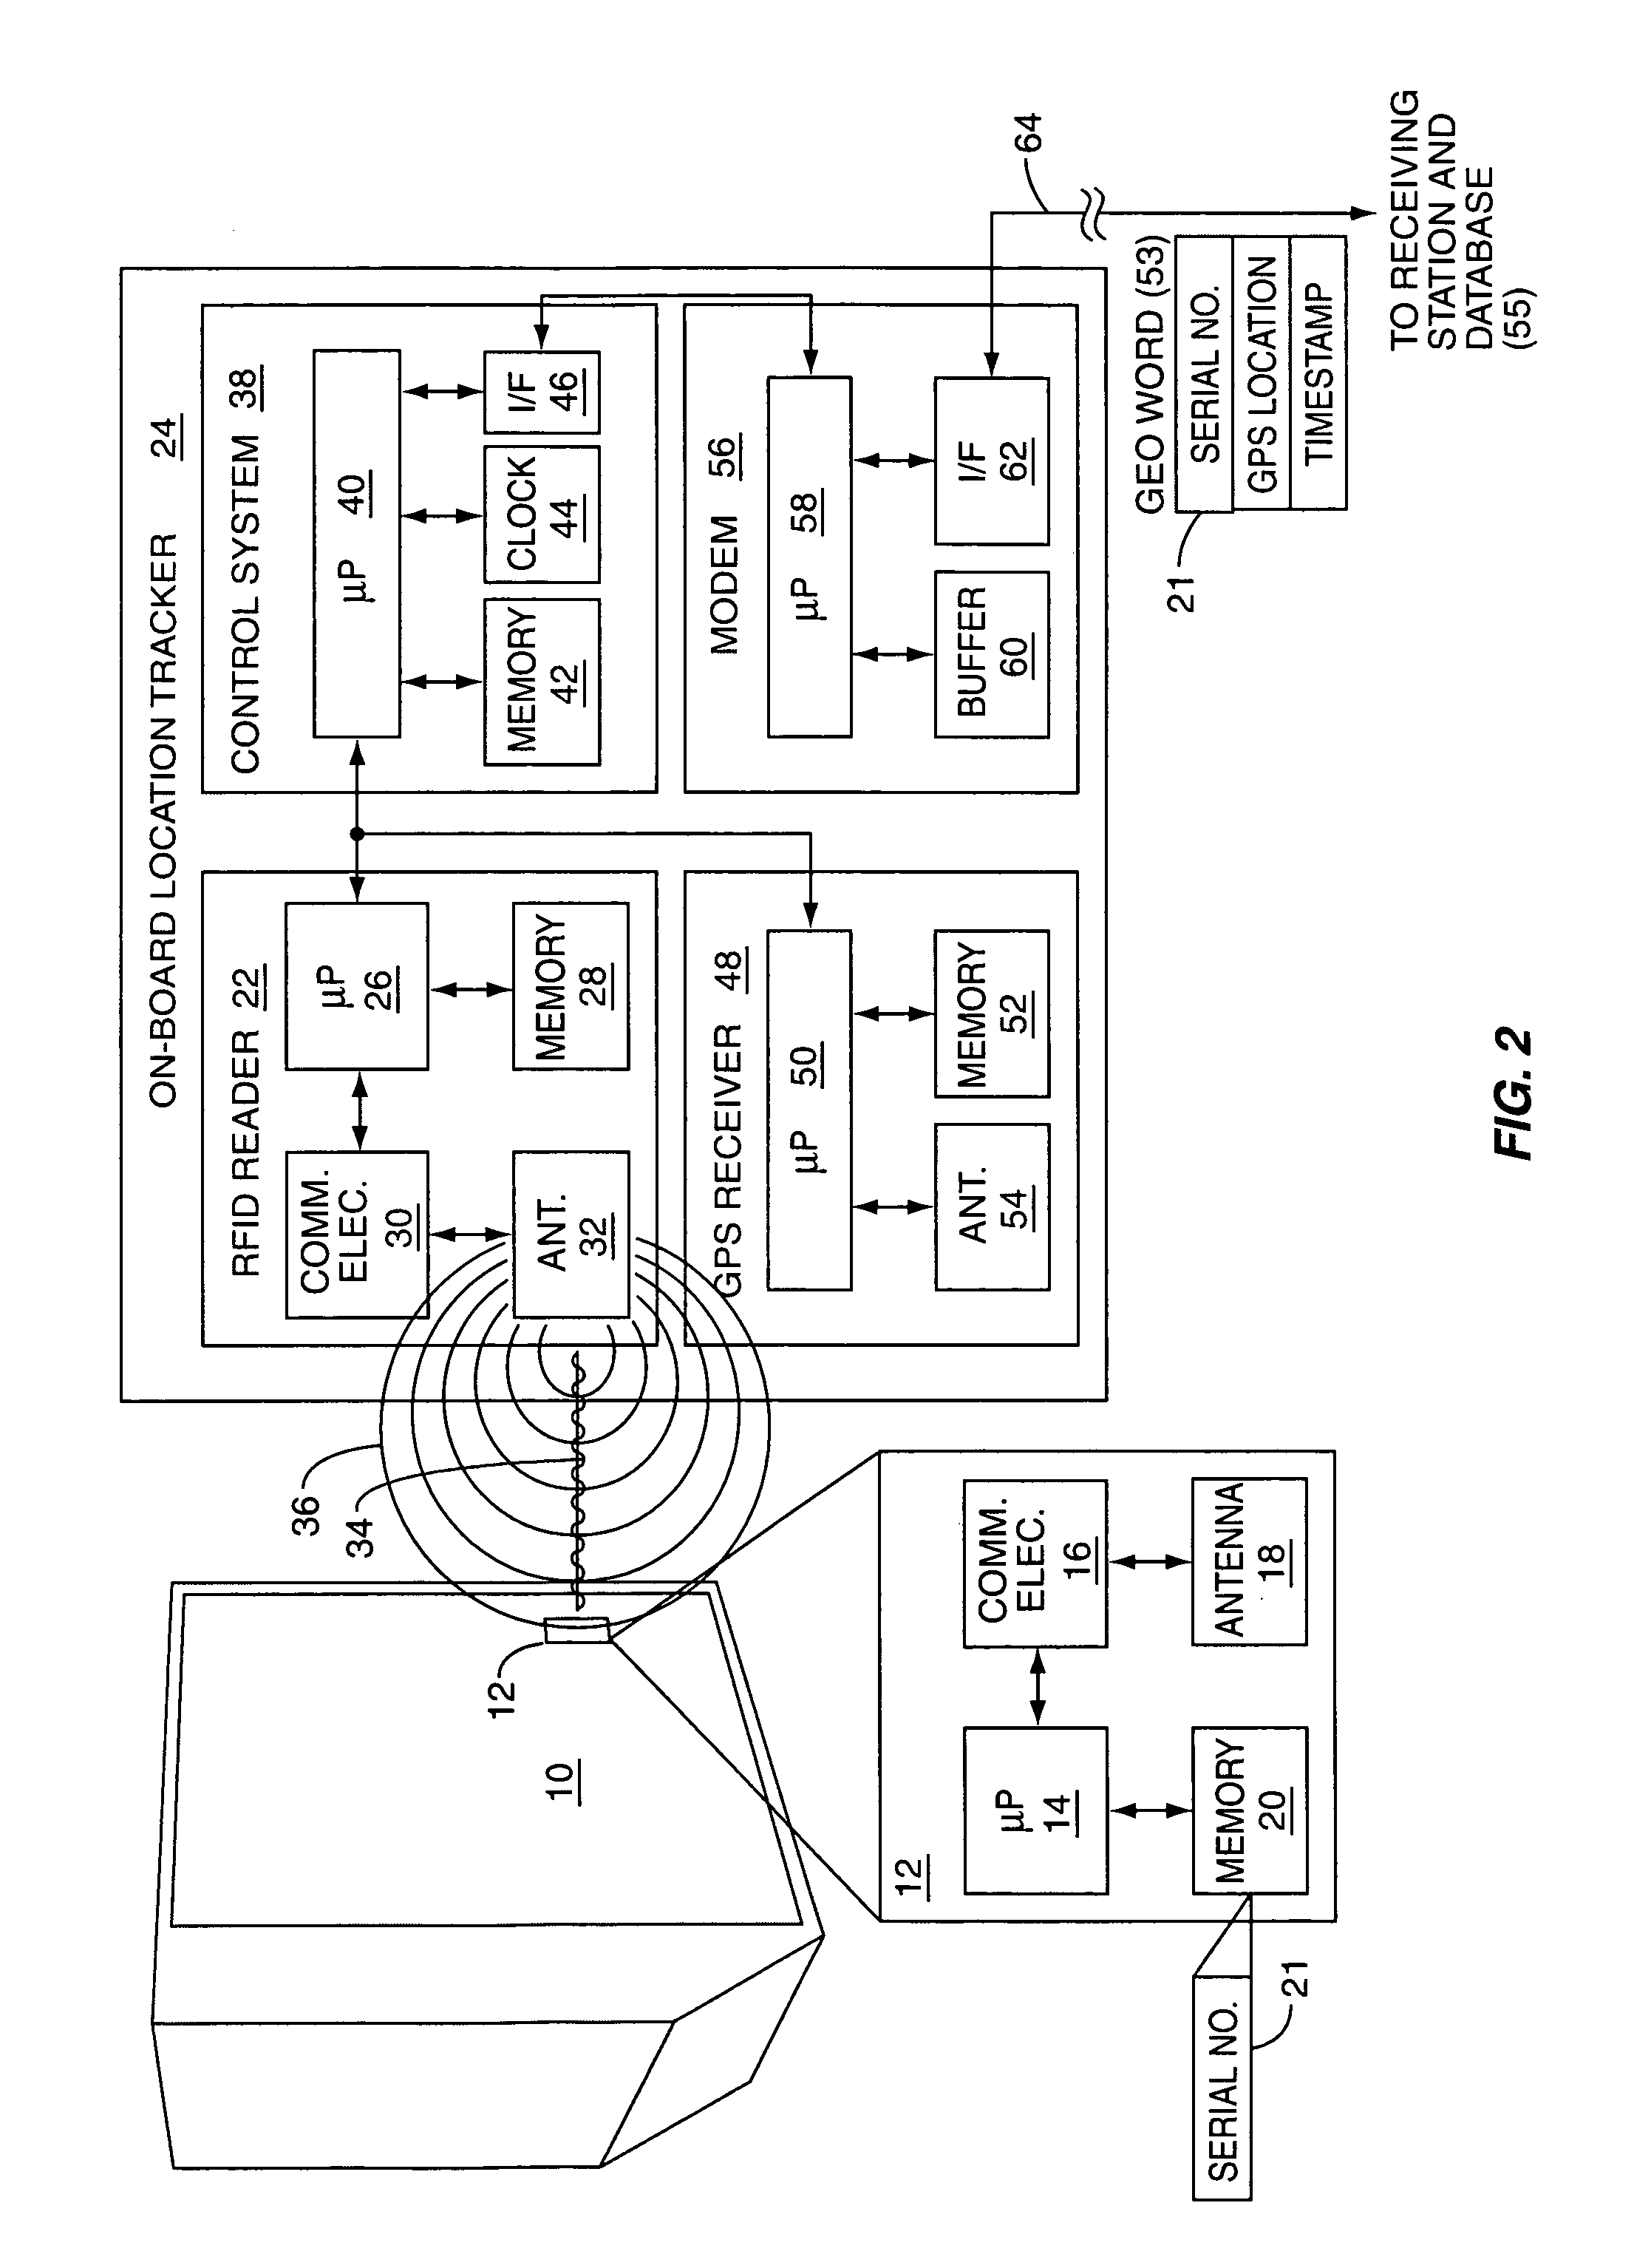 Passive container tracking device, system, and method